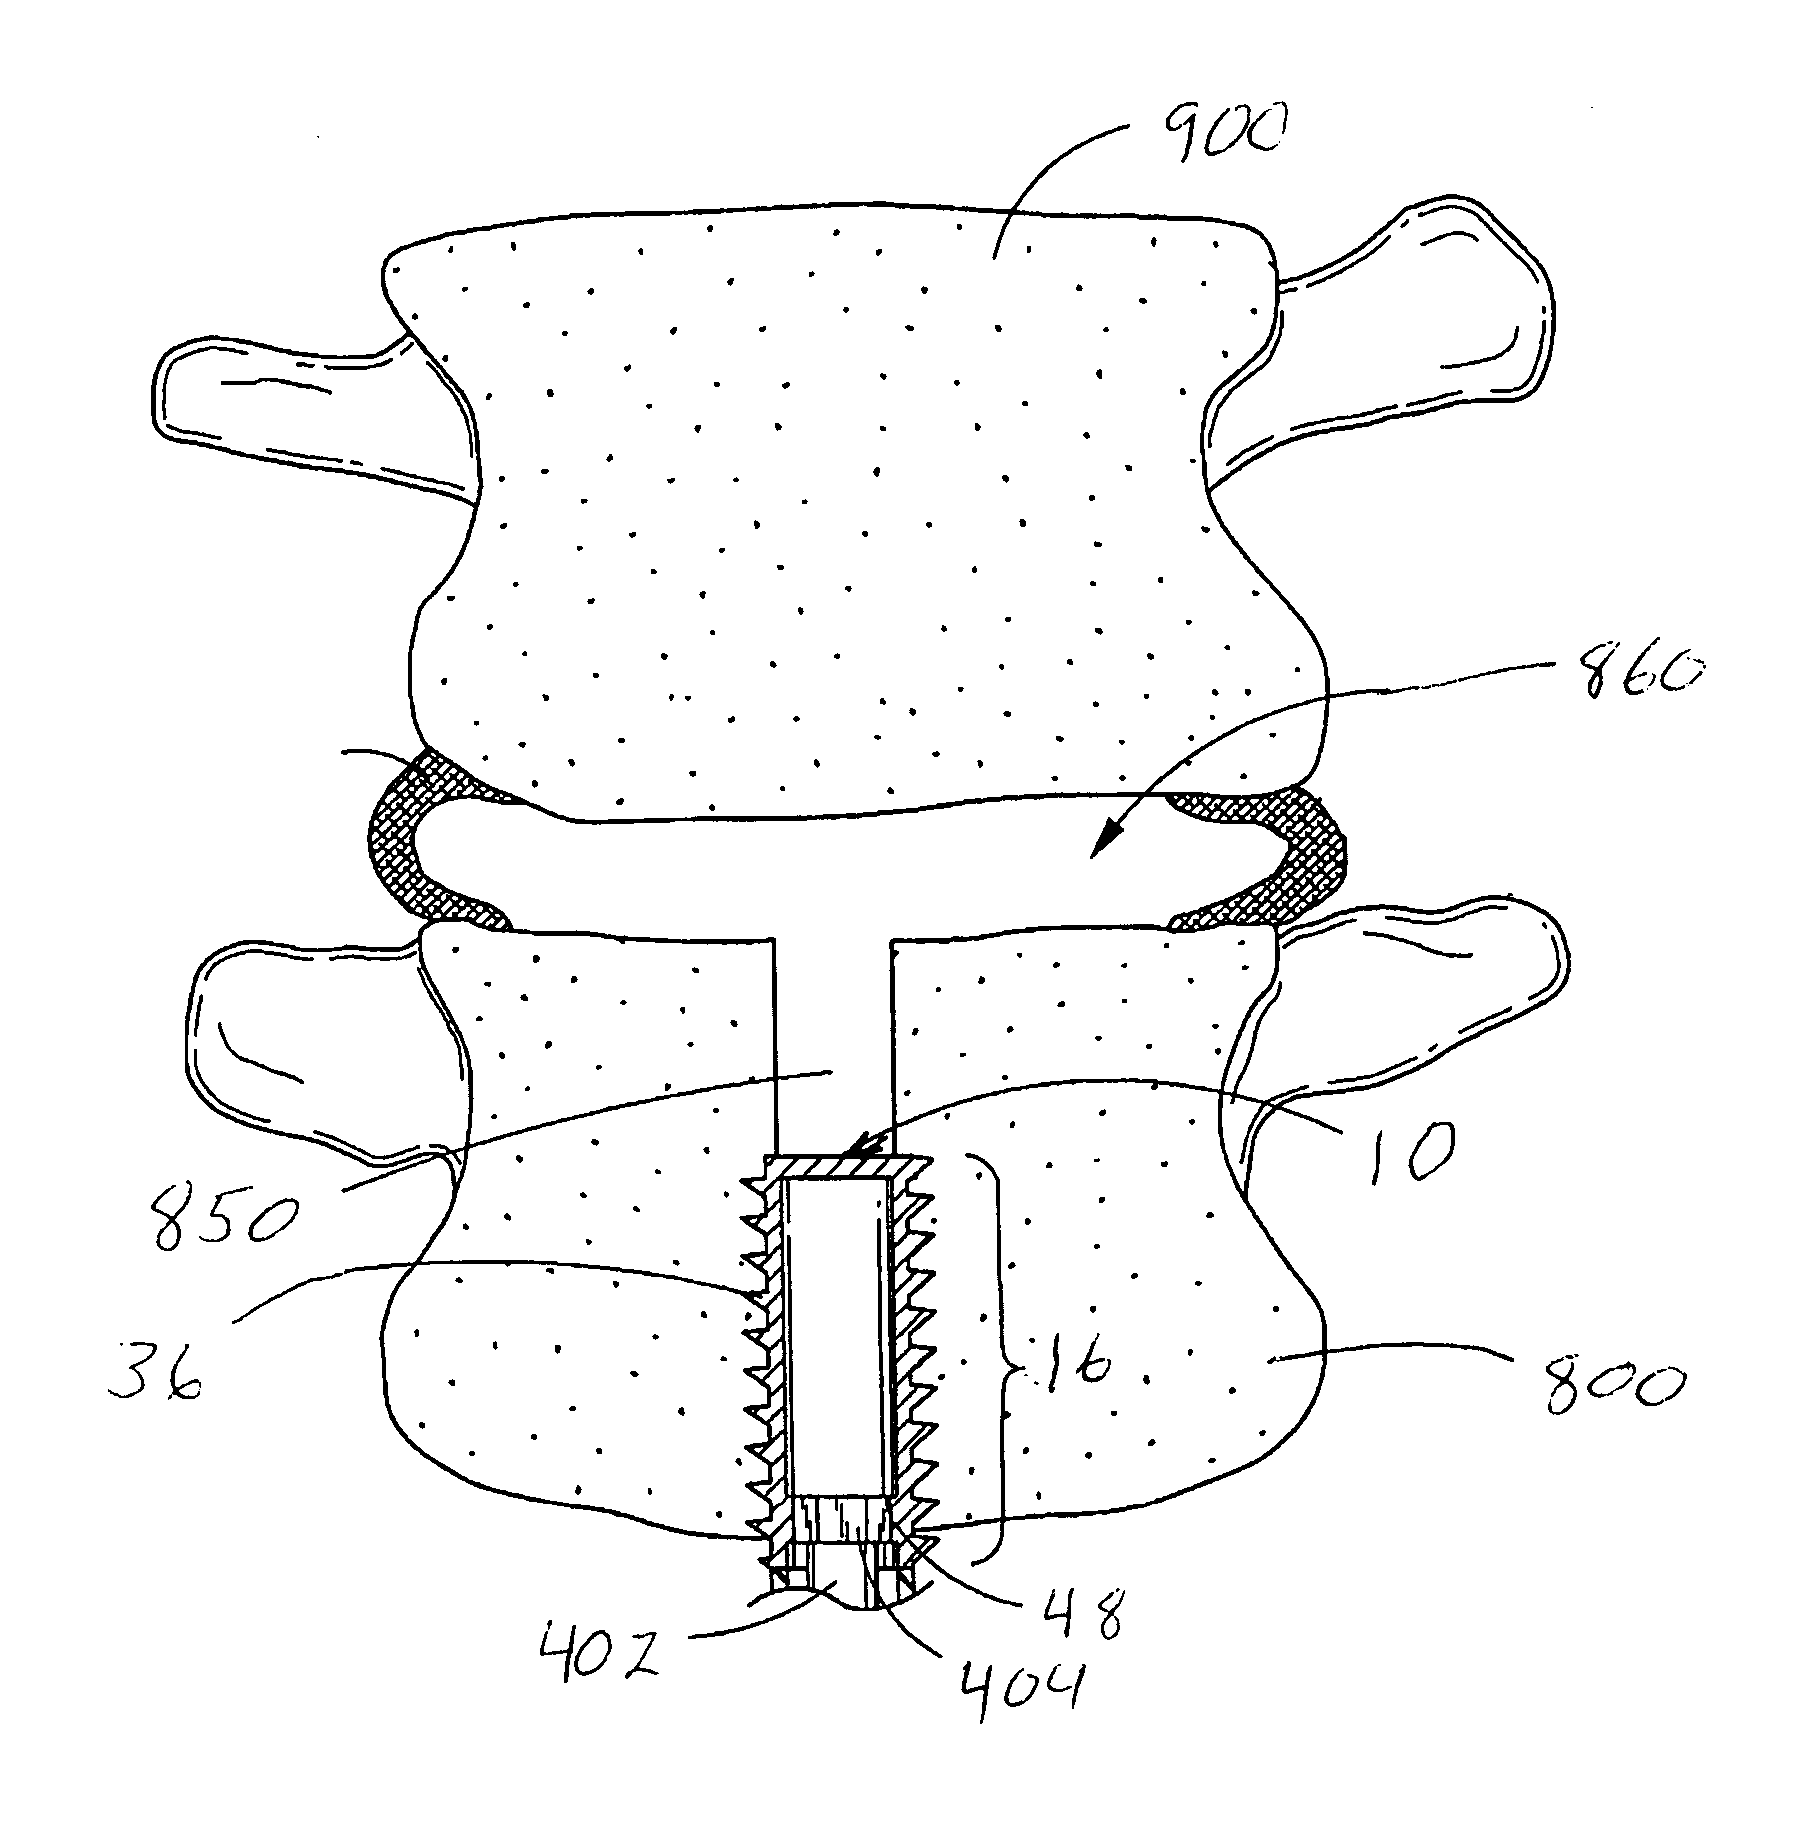 Spinal mobility preservation apparatus having an expandable membrane